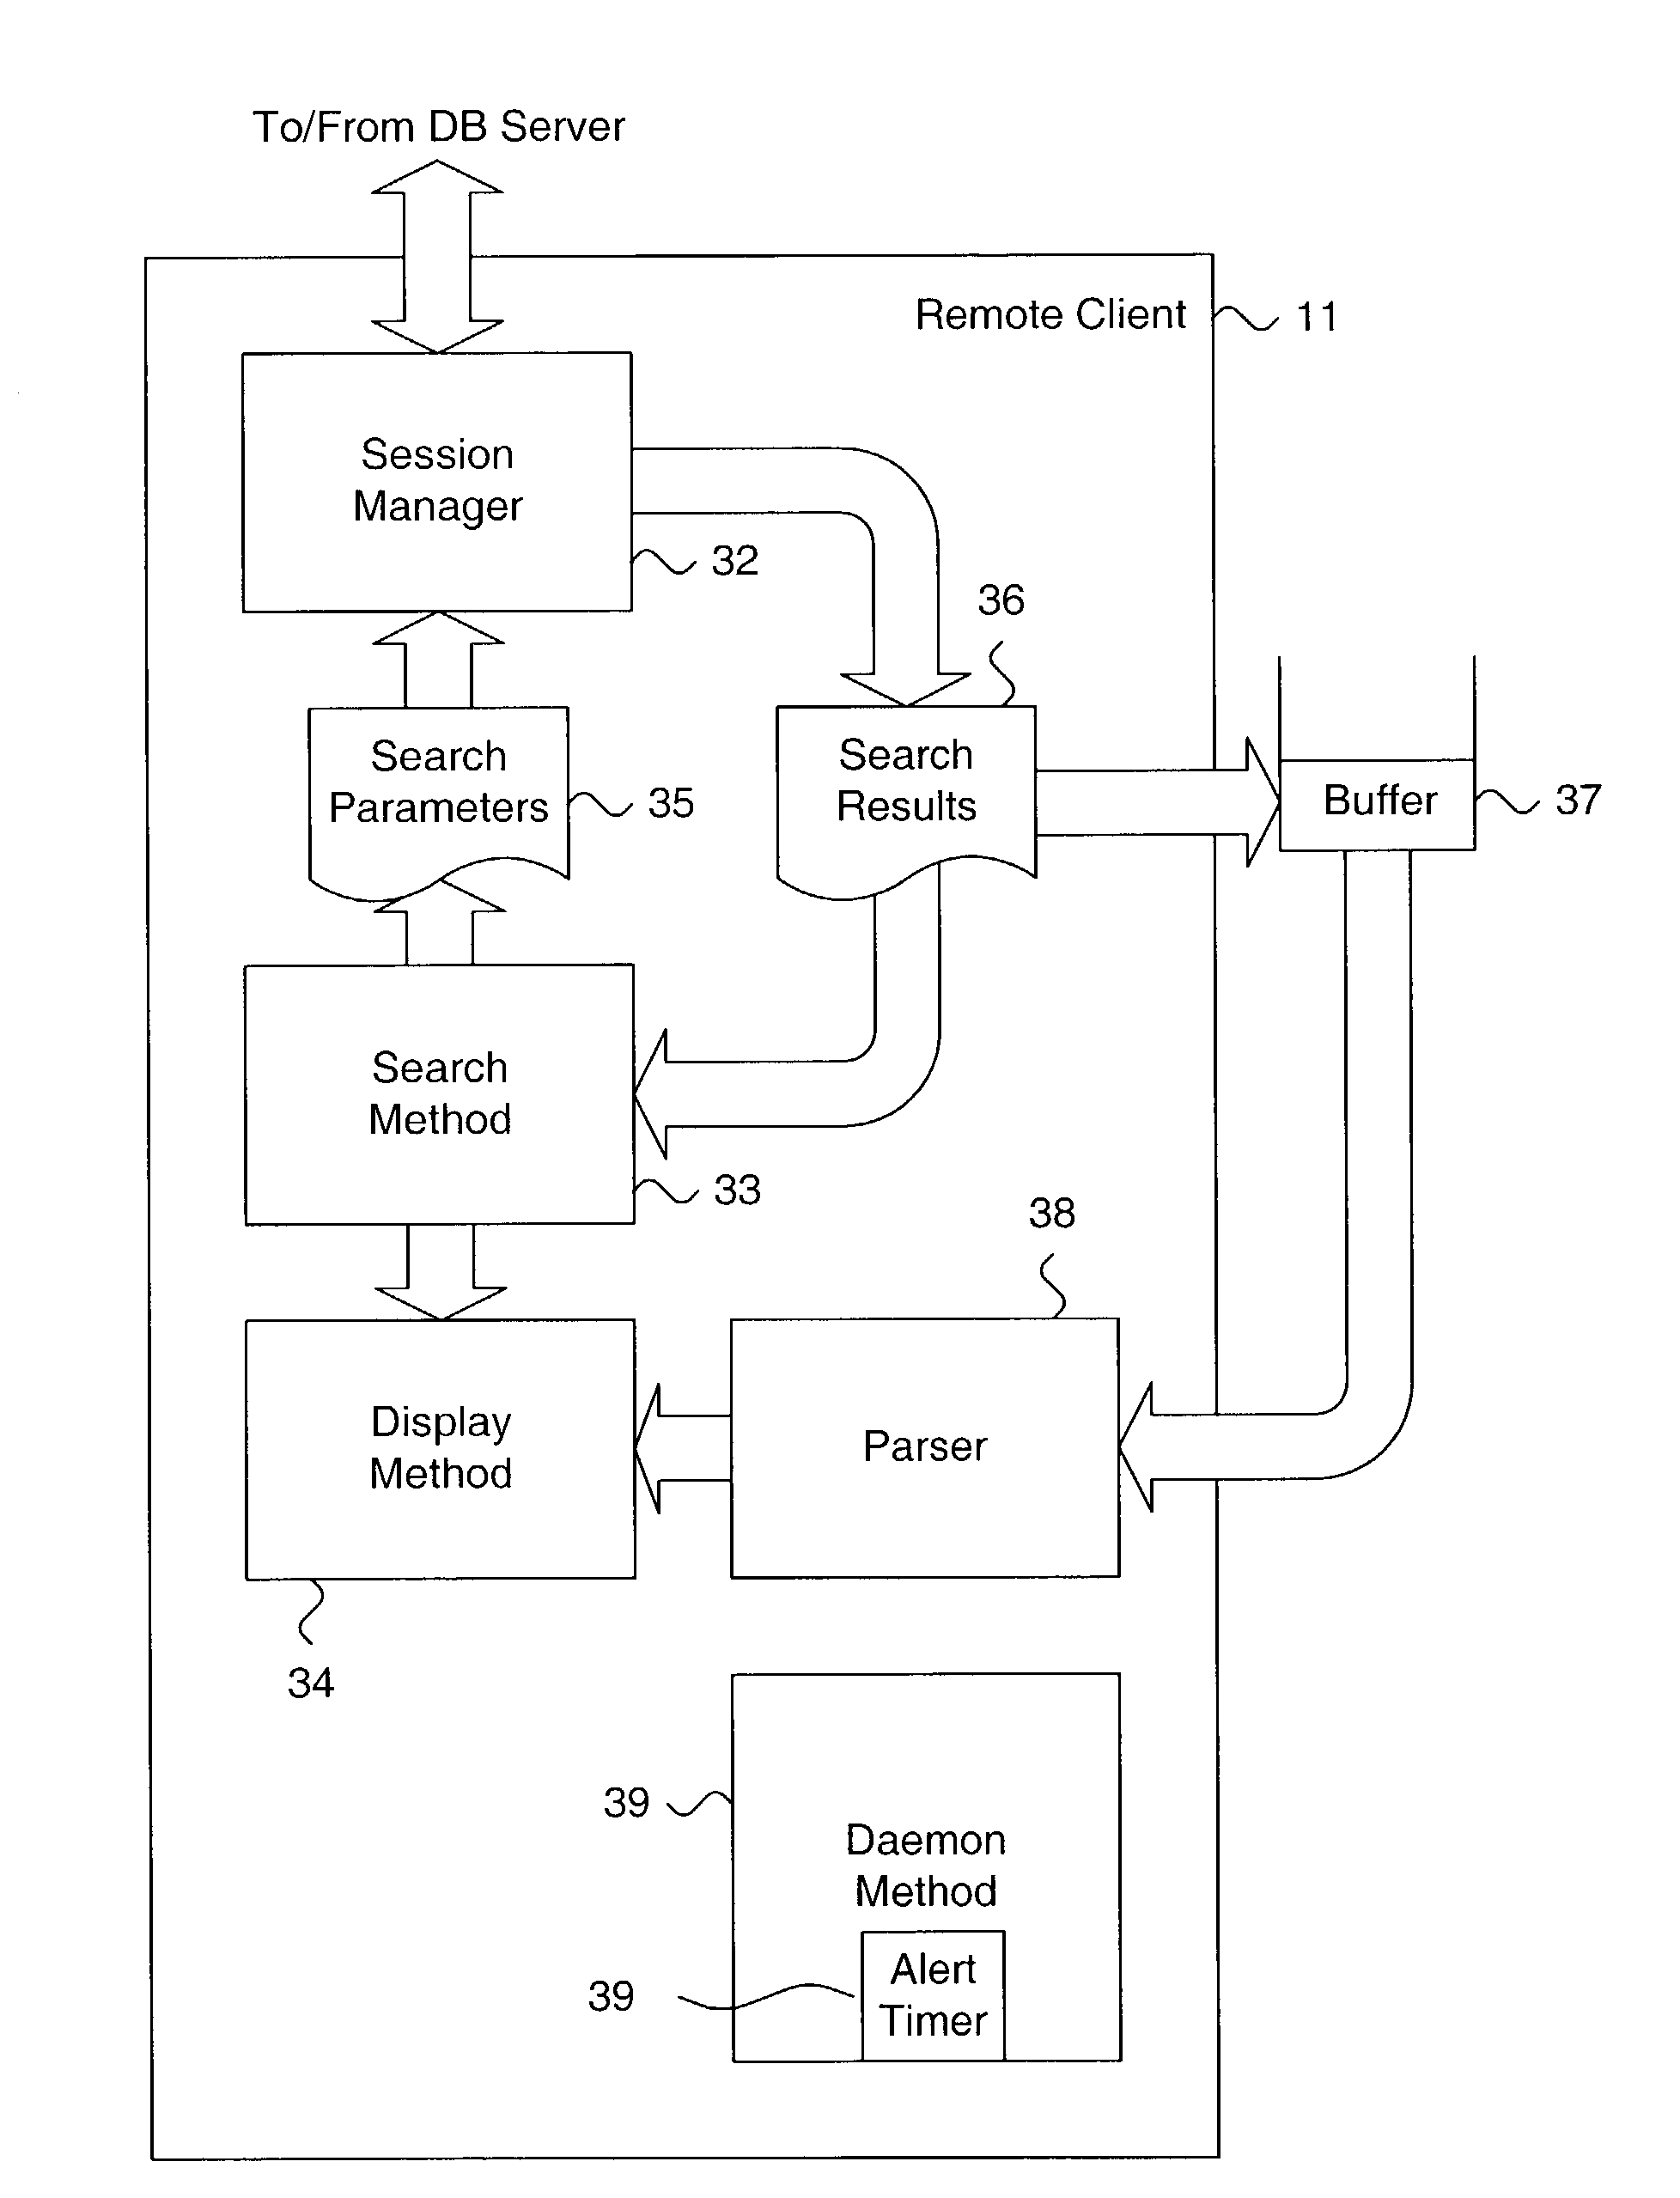 System and method for transacting retrieval of real estate property listings using a remote client interfaced over an information network